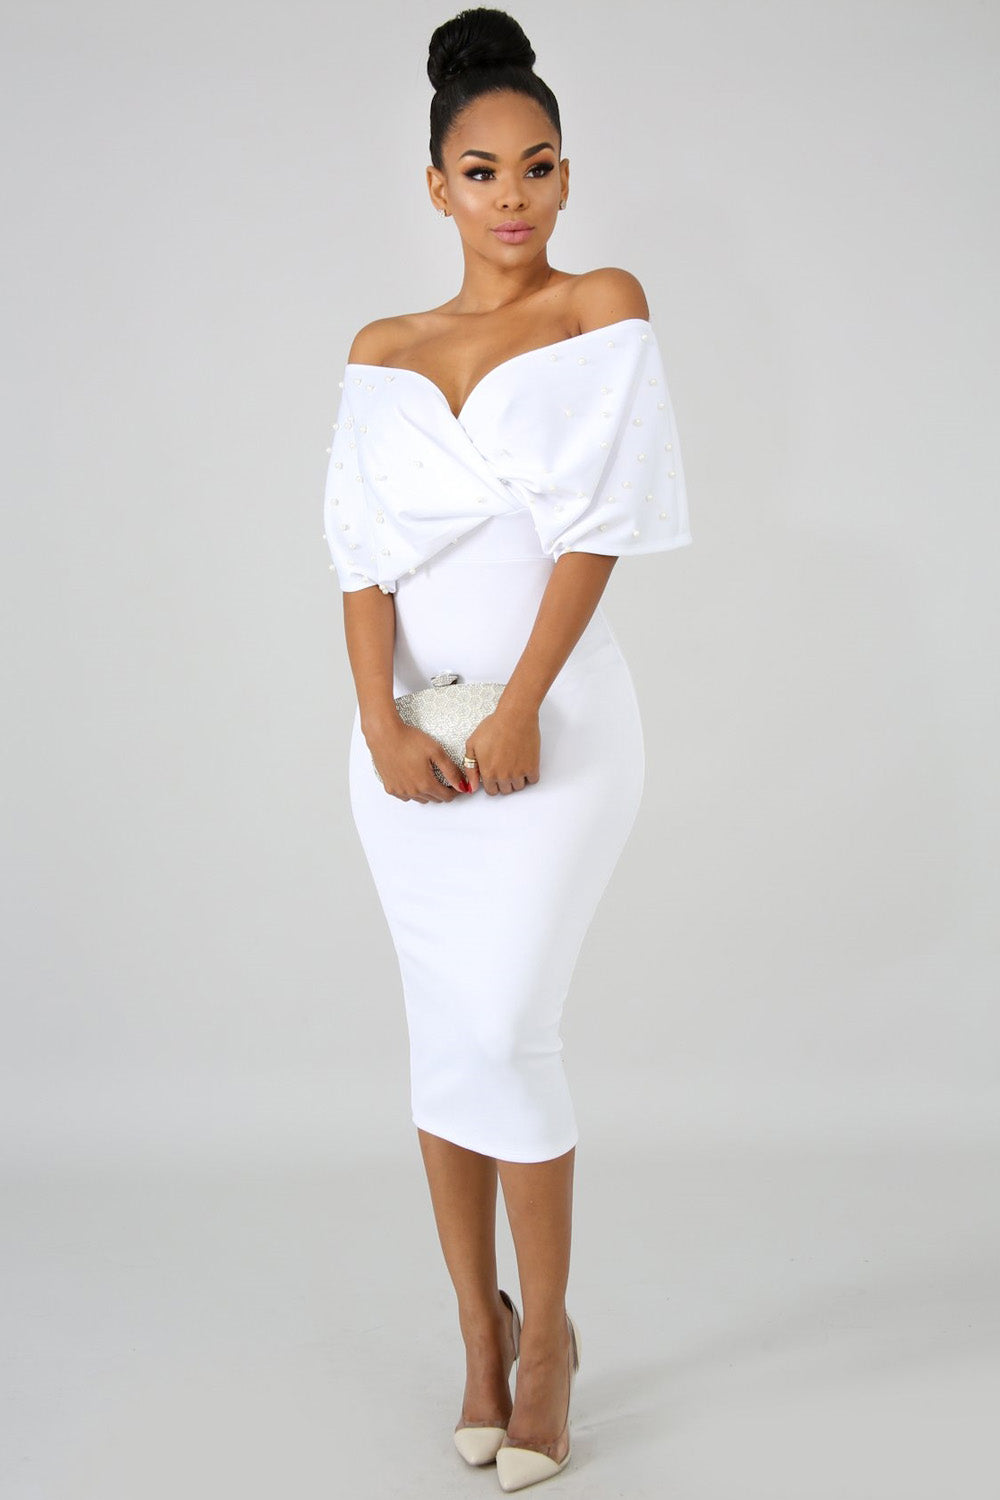 goPals fitted white midi length dress with off-the-shoulder neckline and large bow. 